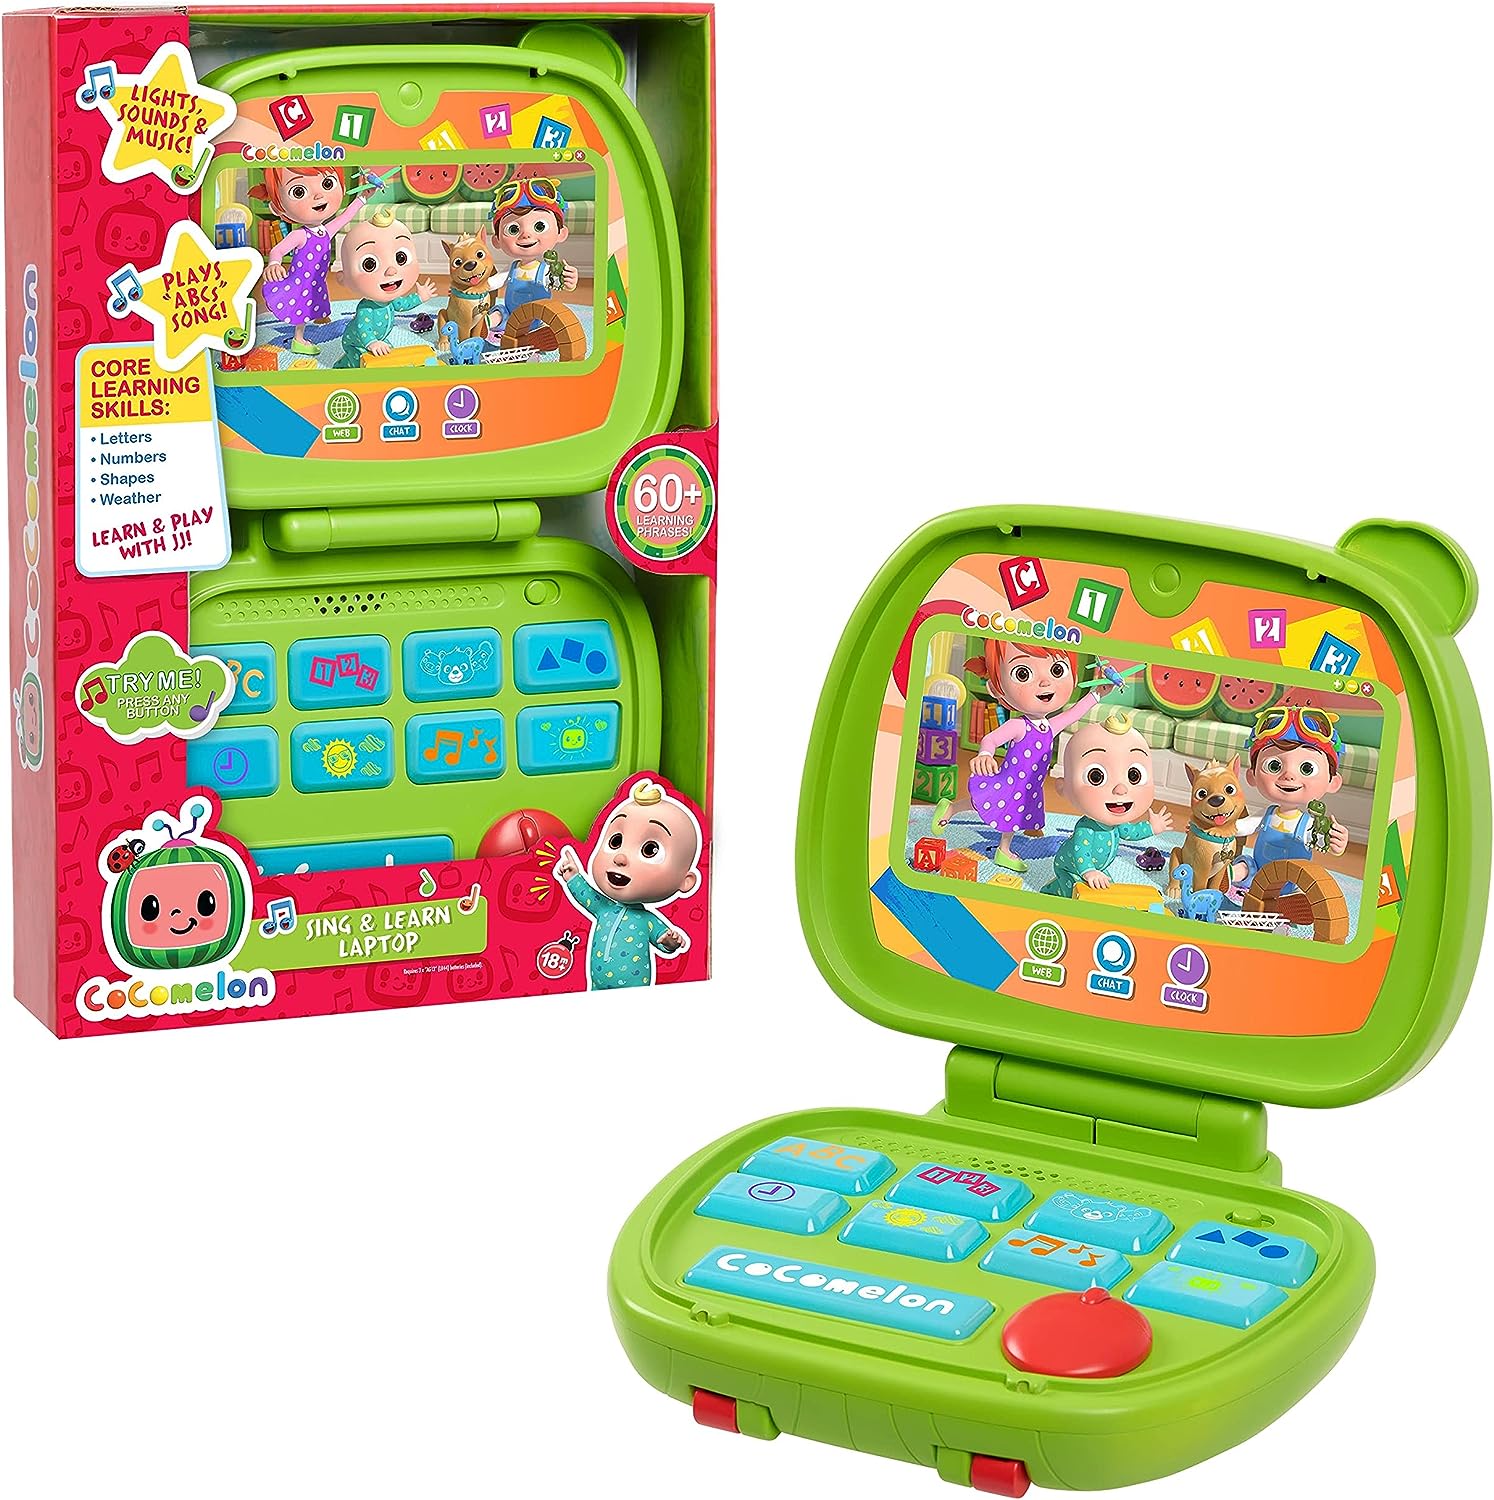 CoComelon Sing and Learn Laptop Toy for Kids, Lights, [...]